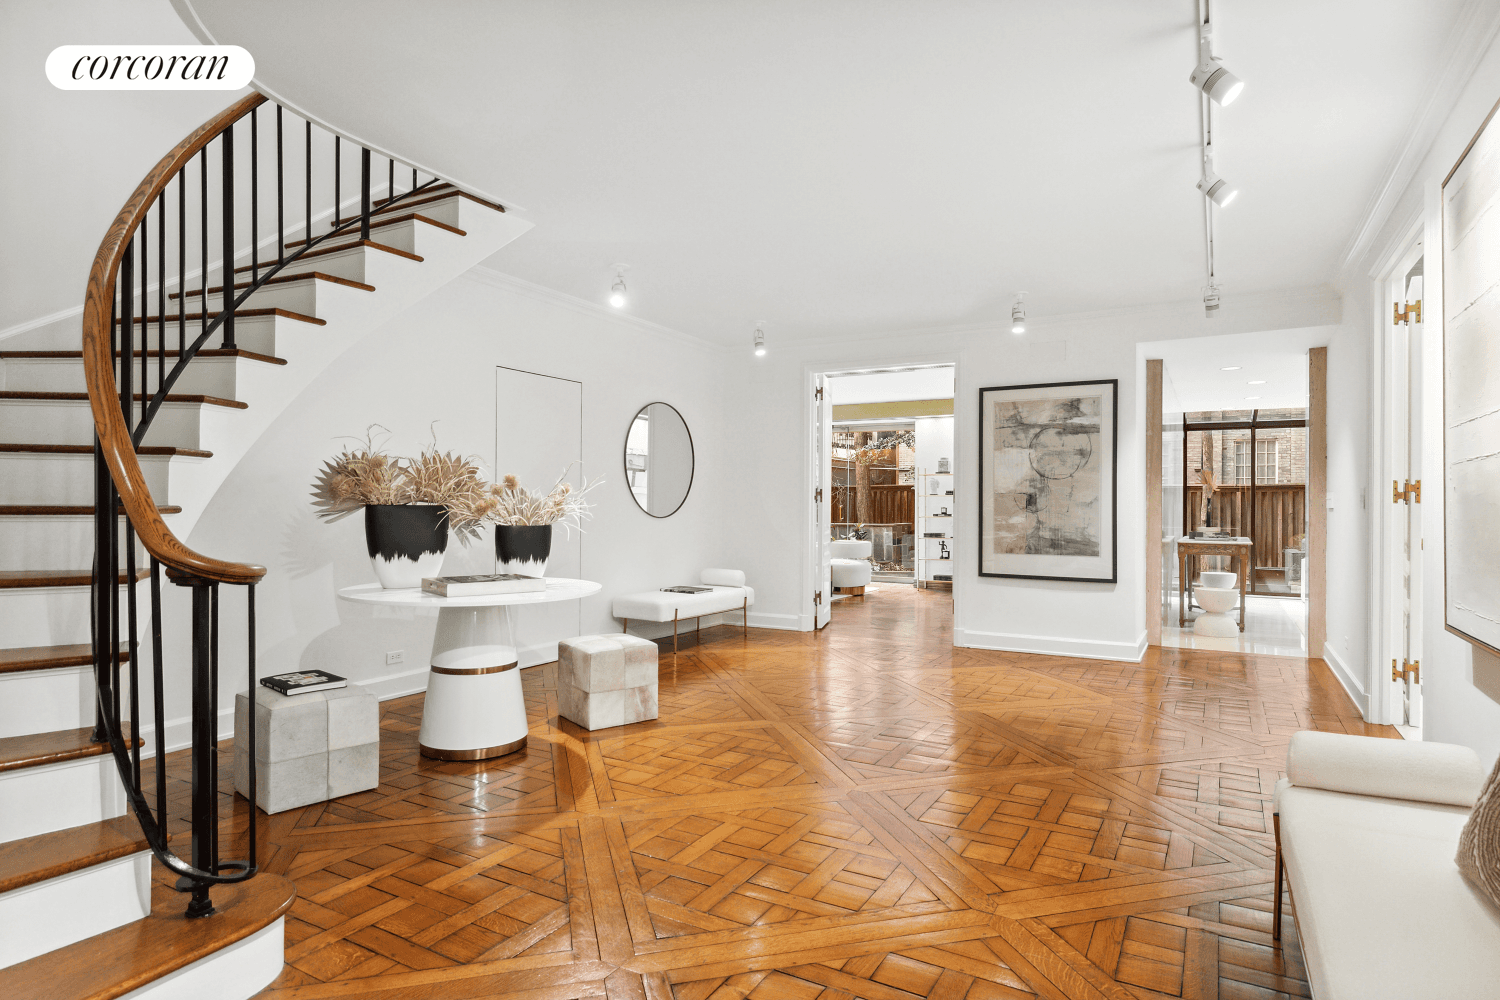 812 Fifth Avenue is an exceptional duplex Maisonette offering the luxury of a Fifth Avenue cooperative combined with the indoor and outdoor space of a townhouse.